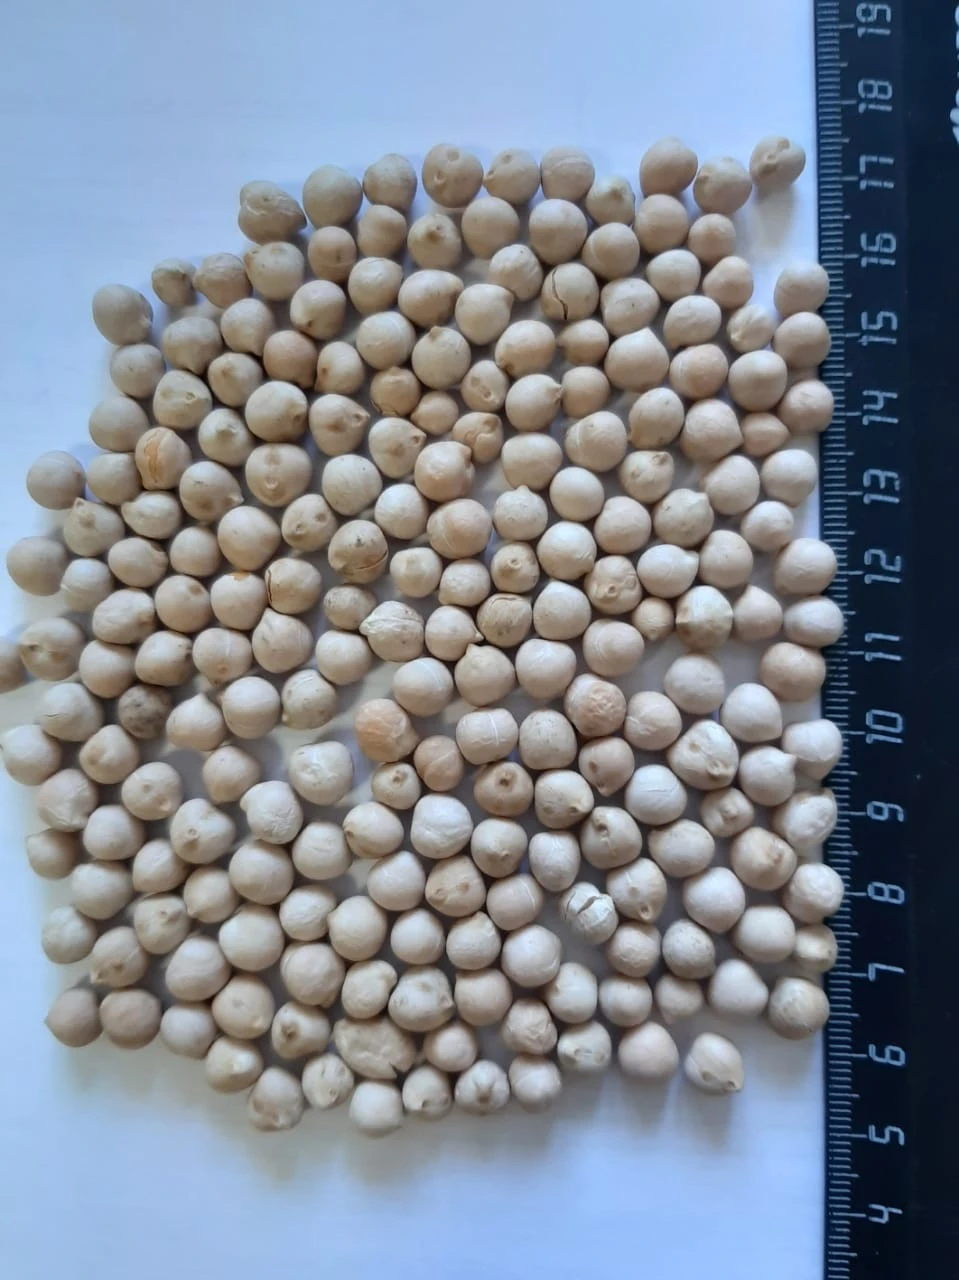 100% Natural chickpeas